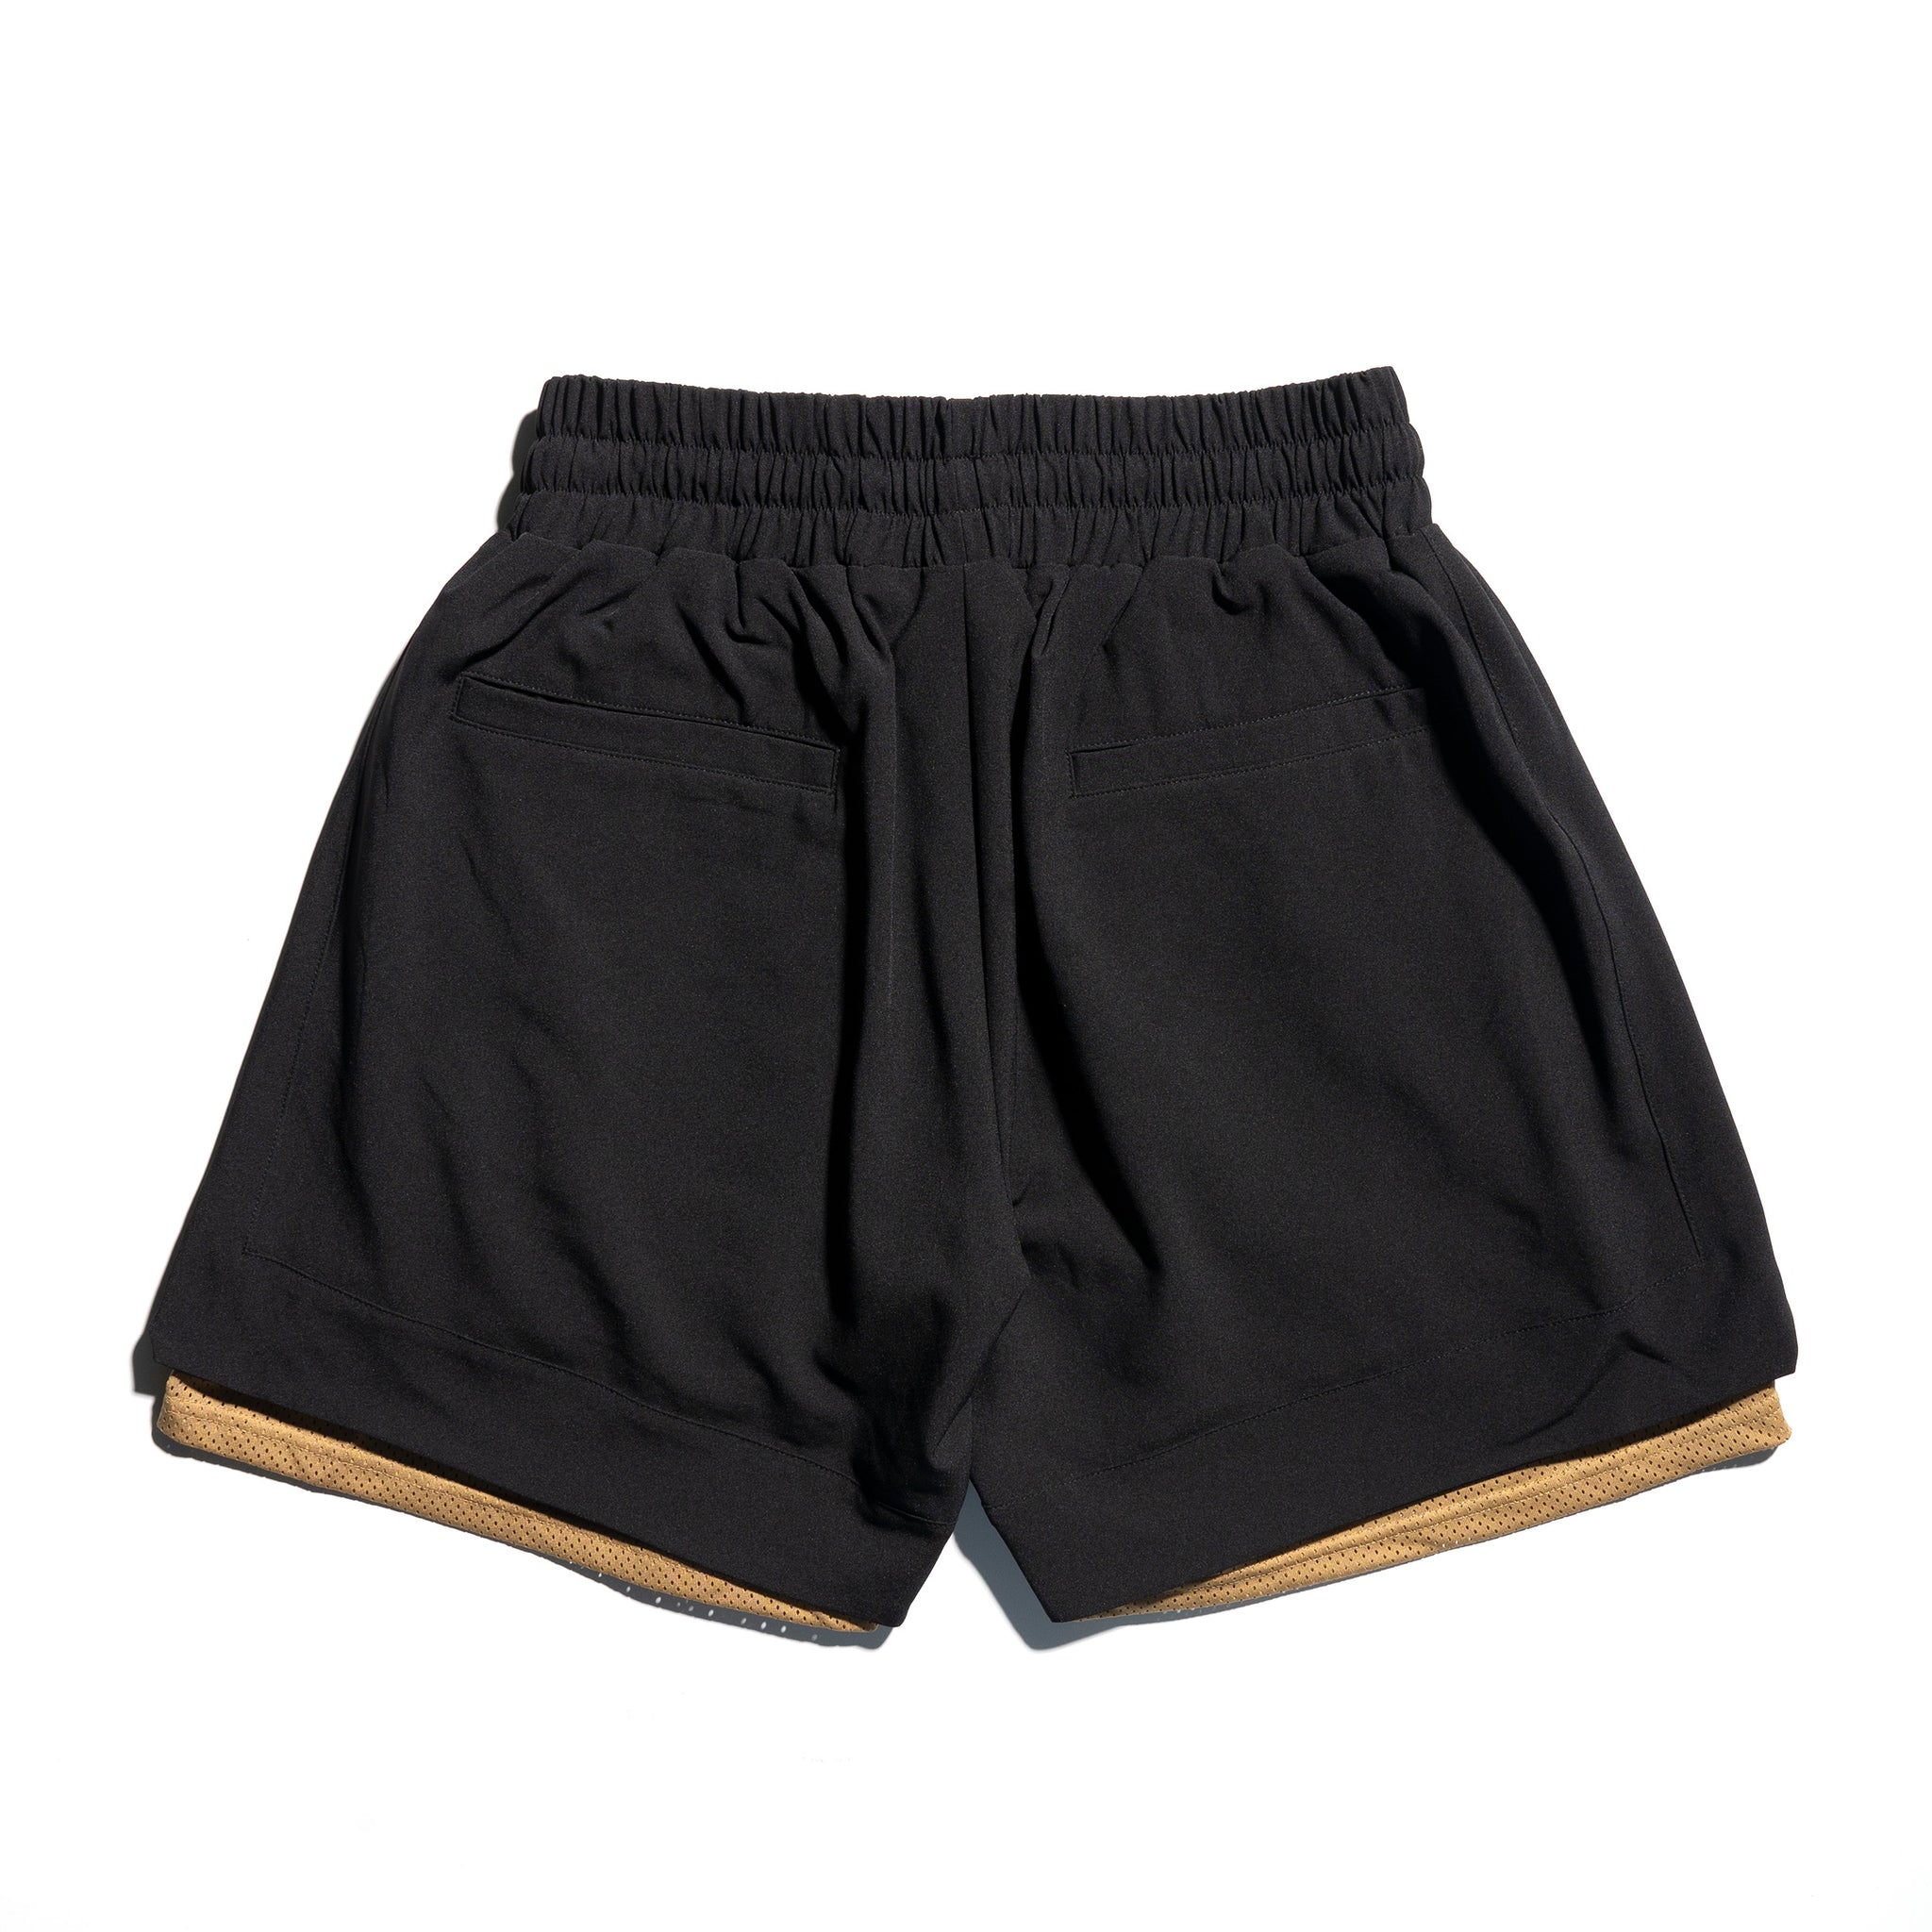 AGAINST X DOMINATE PATCH BALL SHORTS